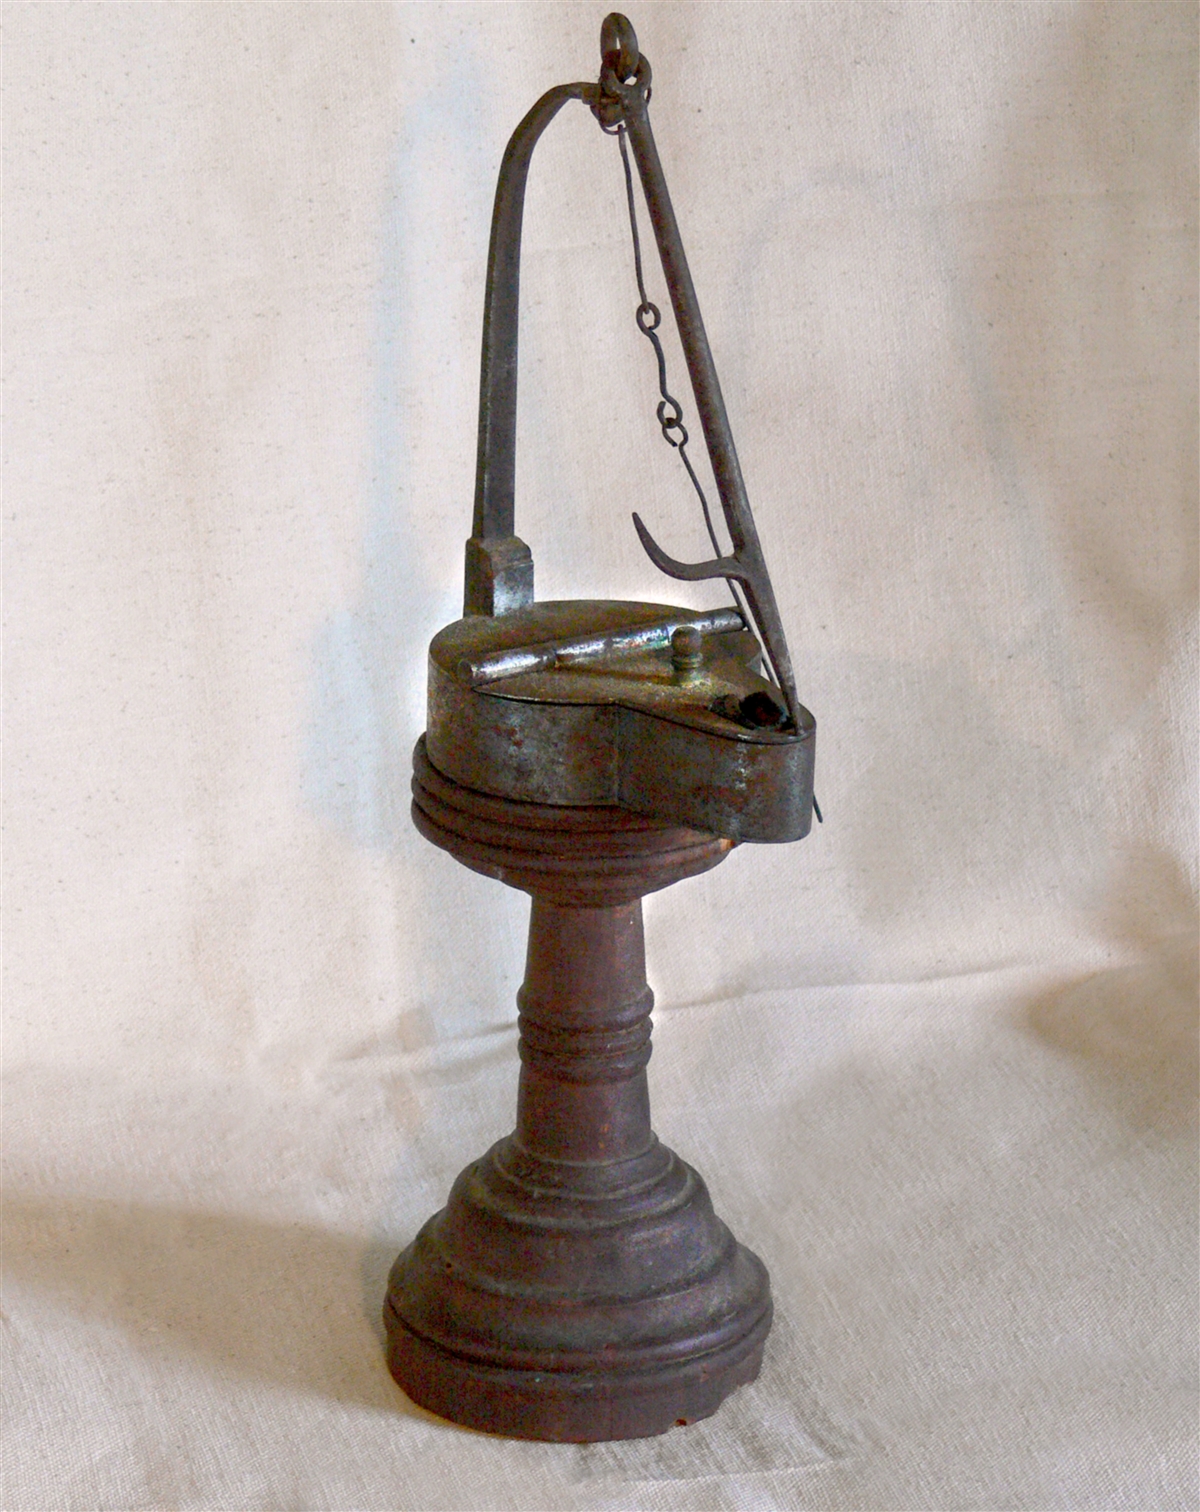 A small metal fat lamp sits on top of a wooden pedestal. The lamp is in a keyhole shape with a hinged lid. There is a small opening at the front, as well as a small metal finial. At the back is a long, curved piece of metal which holds a wick pick and anchor.